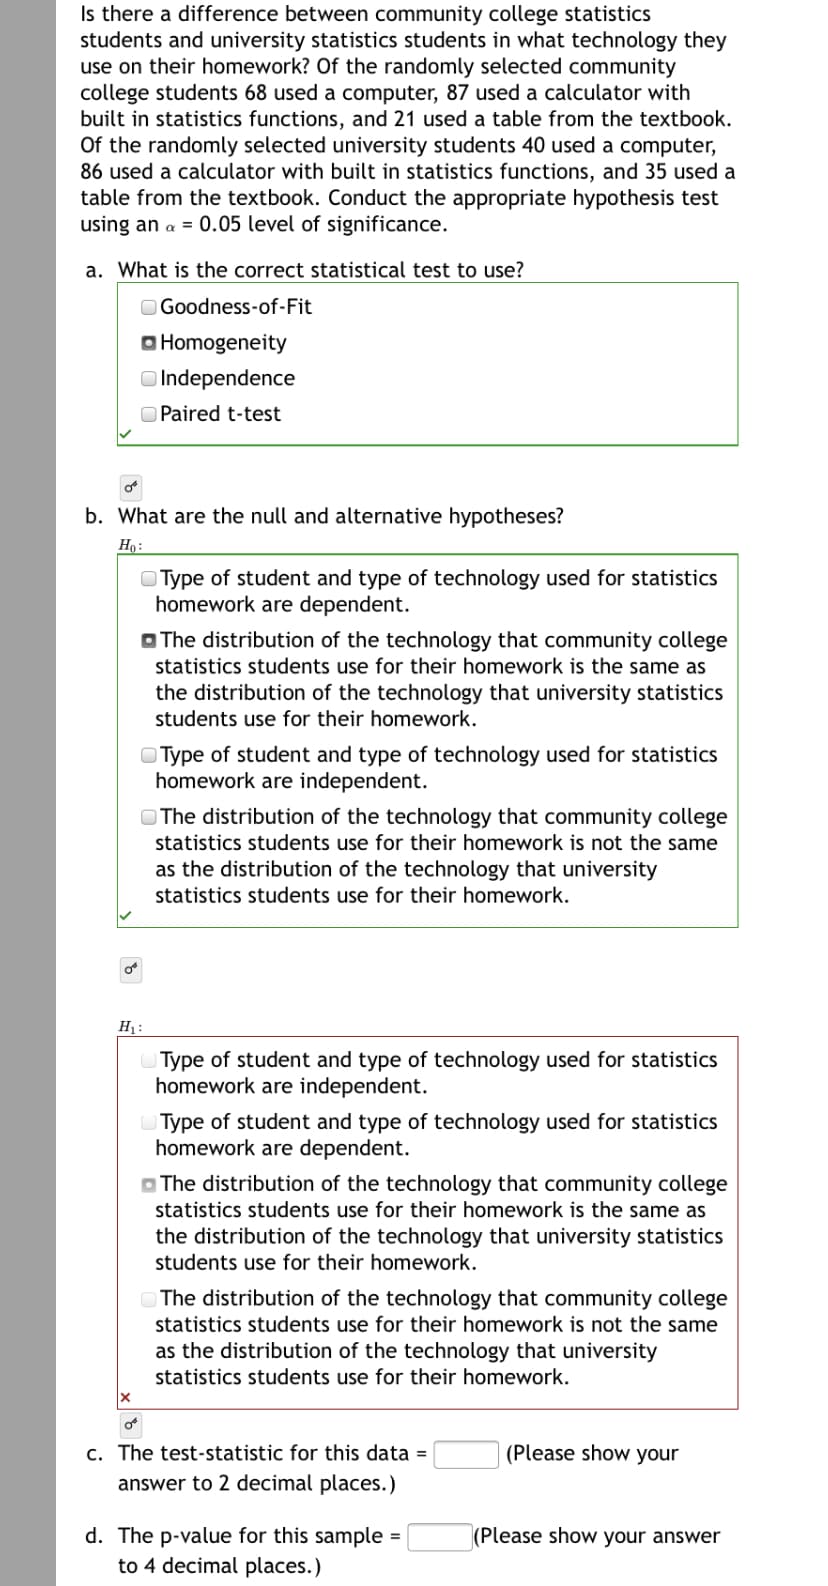 Is there a difference between community college statistics
students and university statistics students in what technology they
use on their homework? Of the randomly selected community
college students 68 used a computer, 87 used a calculator with
built in statistics functions, and 21 used a table from the textbook.
Of the randomly selected university students 40 used a computer,
86 used a calculator with built in statistics functions, and 35 used a
table from the textbook. Conduct the appropriate hypothesis test
using an a = 0.05 level of significance.
a. What is the correct statistical test to use?
O Goodness-of-Fit
O Homogeneity
O Independence
O Paired t-test
b. What are the null and alternative hypotheses?
Họ:
O Type of student and type of technology used for statistics
homework are dependent.
O The distribution of the technology that community college
statistics students use for their homework is the same as
the distribution of the technology that university statistics
students use for their homework.
O Type of student and type of technology used for statistics
homework are independent.
O The distribution of the technology that community college
statistics students use for their homework is not the same
as the distribution of the technology that university
statistics students use for their homework.
H :
Type of student and type of technology used for statistics
homework are independent.
Type of student and type of technology used for statistics
homework are dependent.
O The distribution of the technology that community college
statistics students use for their homework is the same as
the distribution of the technology that university statistics
students use for their homework.
The distribution of the technology that community college
statistics students use for their homework is not the same
as the distribution of the technology that university
statistics students use for their homework.
c. The test-statistic for this data =
(Please show your
answer to 2 decimal places.)
d. The p-value for this sample
to 4 decimal places.)
(Please show your answer
